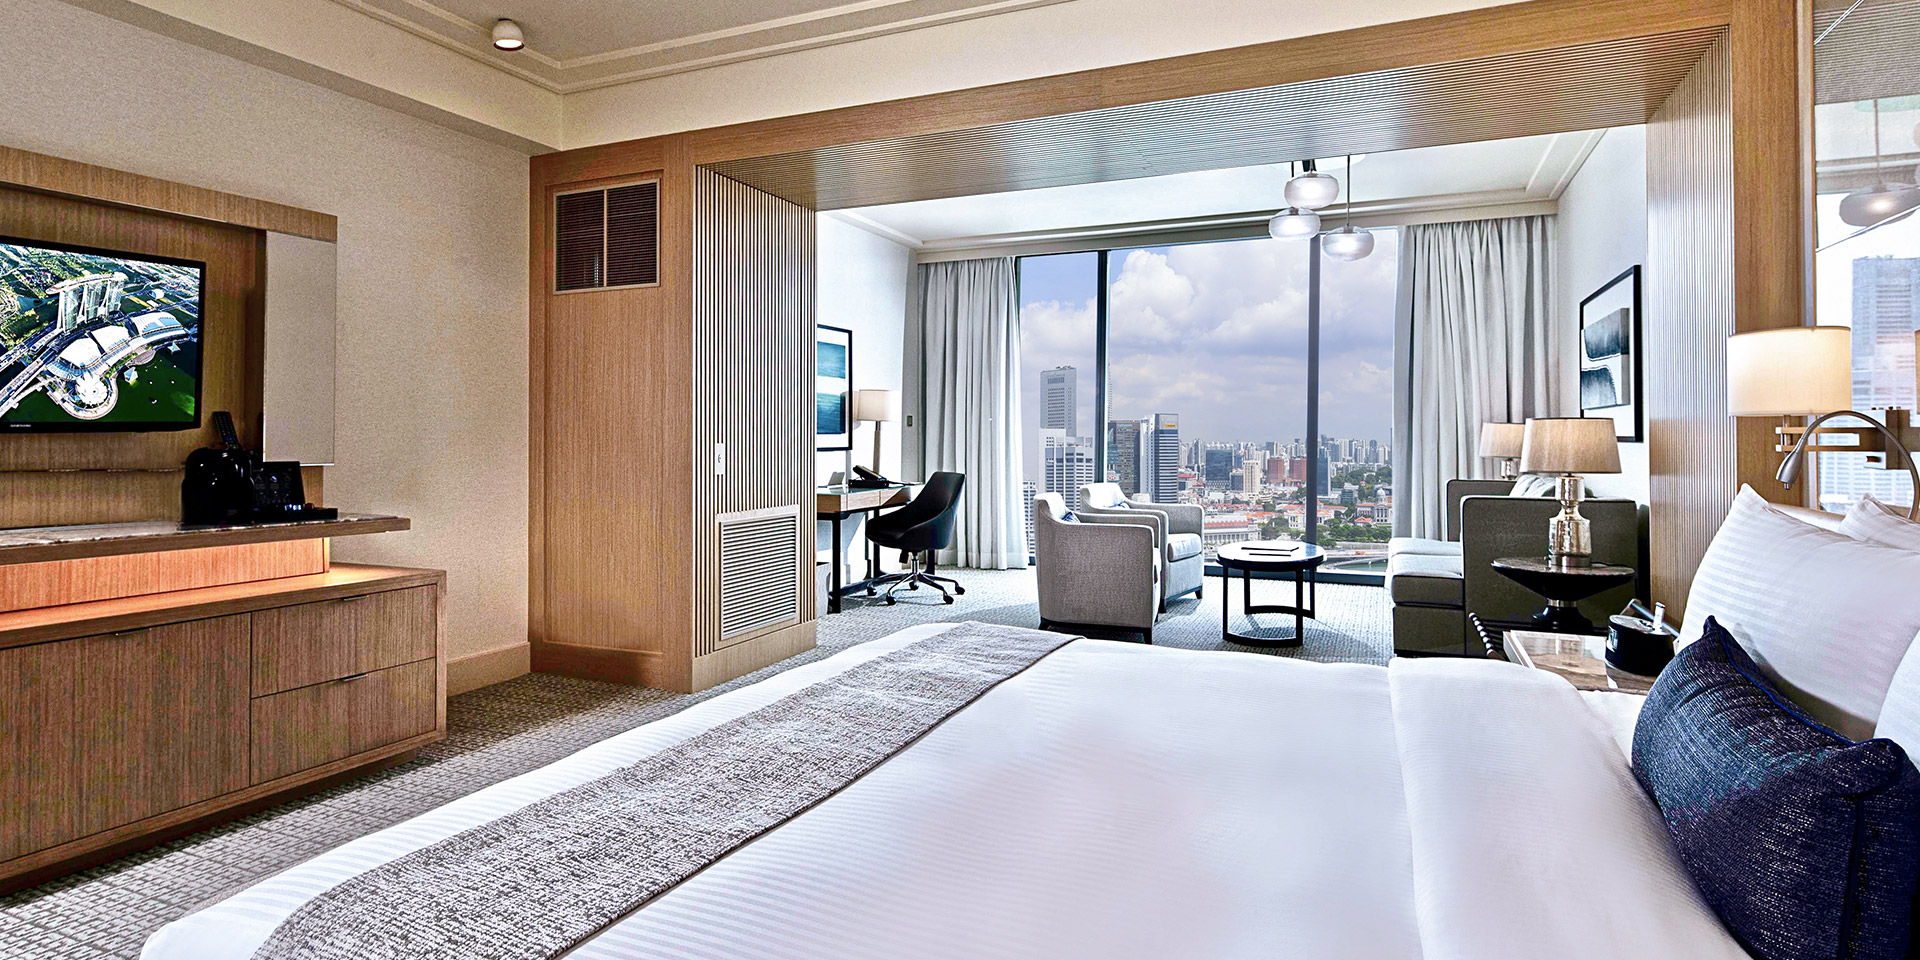 Club Room at Marina Bay Sands with King Bed and City View